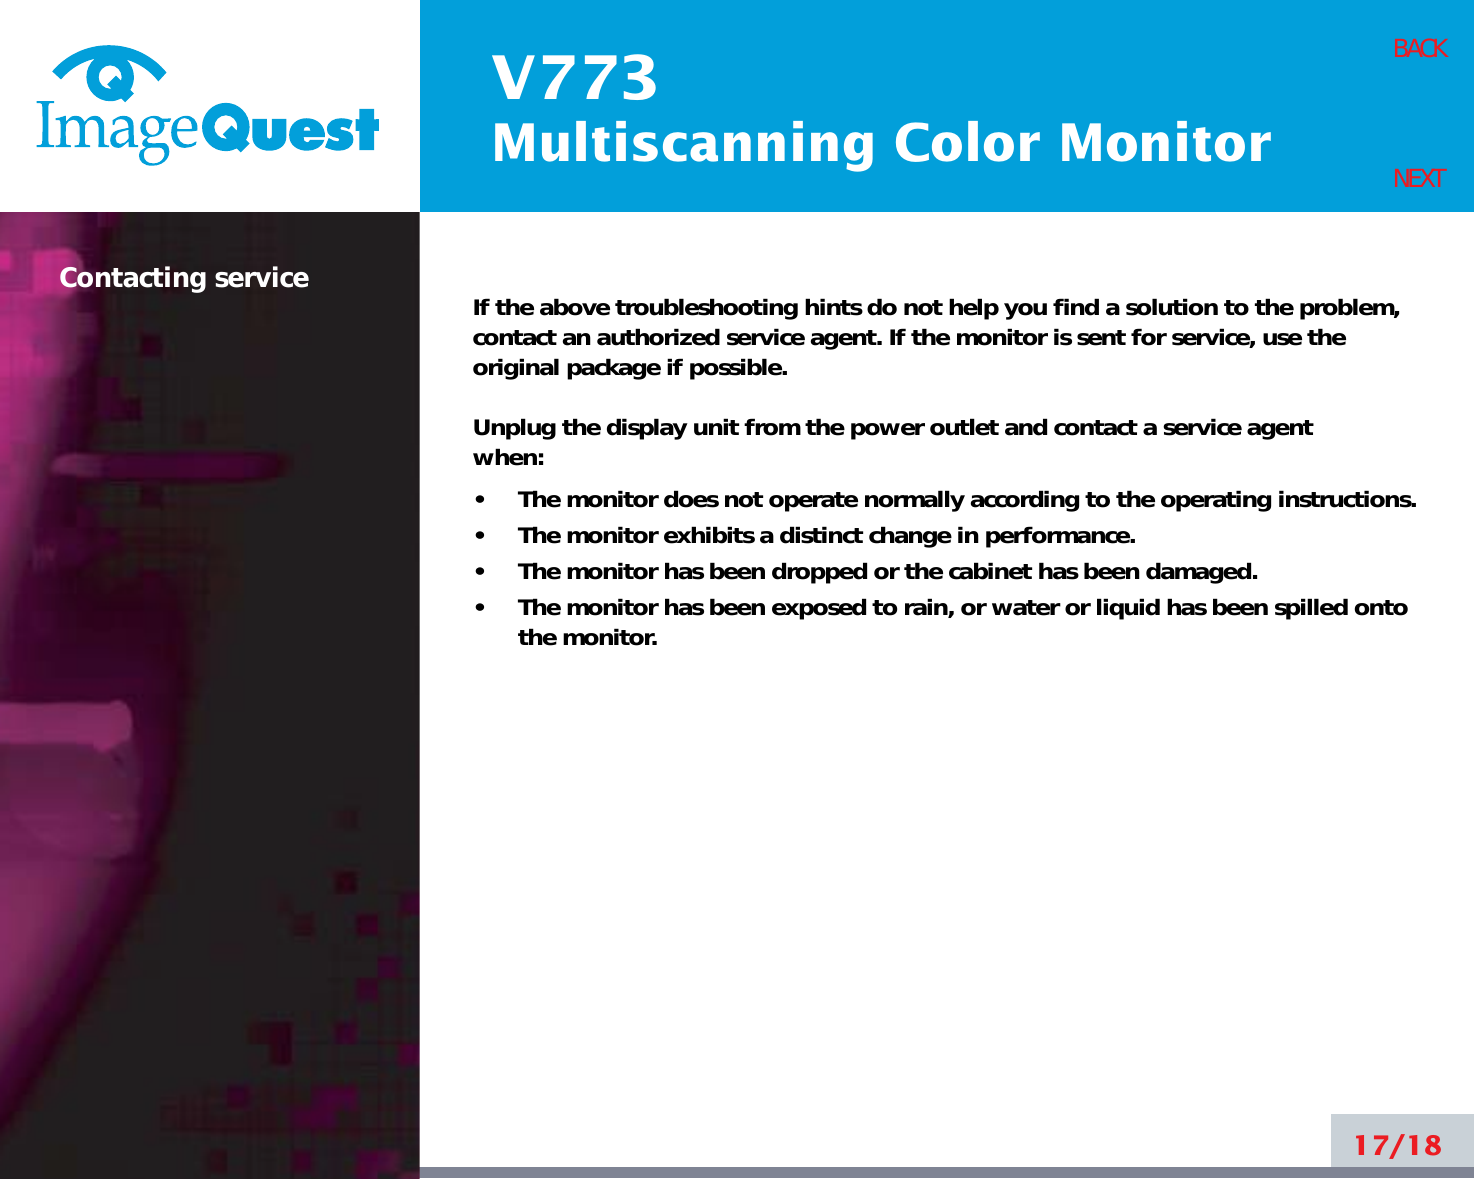 V773Multiscanning Color Monitor17/18BACKNEXTIf the above troubleshooting hints do not help you find a solution to the problem,contact an authorized service agent. If the monitor is sent for service, use theoriginal package if possible.Unplug the display unit from the power outlet and contact a service agent when:•     The monitor does not operate normally according to the operating instructions.•     The monitor exhibits a distinct change in performance.•     The monitor has been dropped or the cabinet has been damaged.•     The monitor has been exposed to rain, or water or liquid has been spilled ontothe monitor.Contacting service